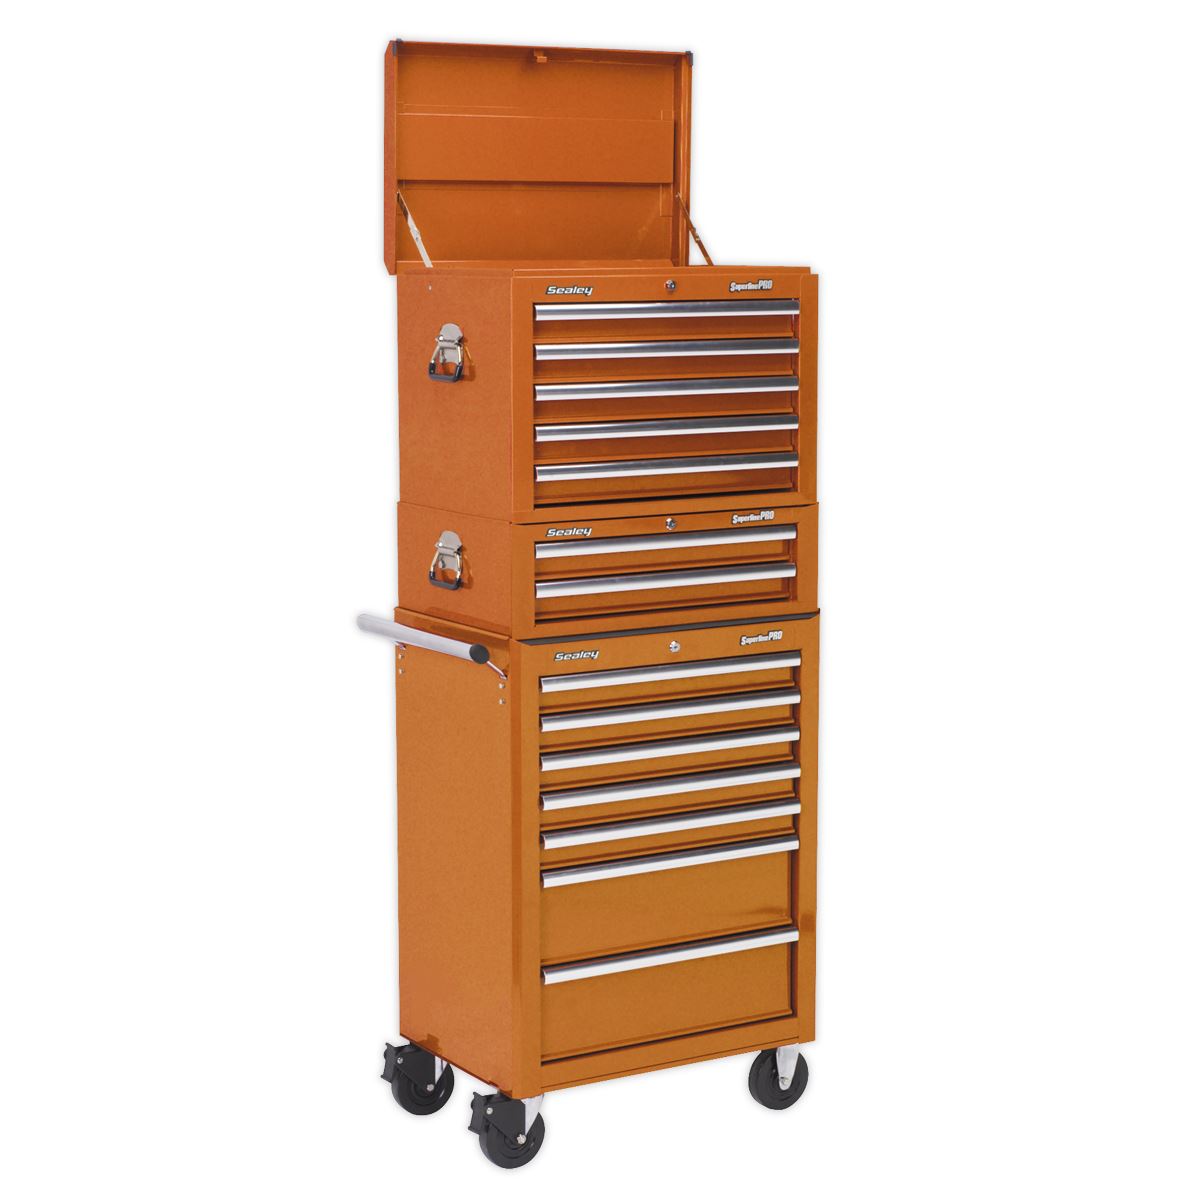 Sealey Superline Pro Topchest, Mid-Box Tool Chest & Rollcab Combination 14 Drawer with Ball-Bearing Slides - Orange